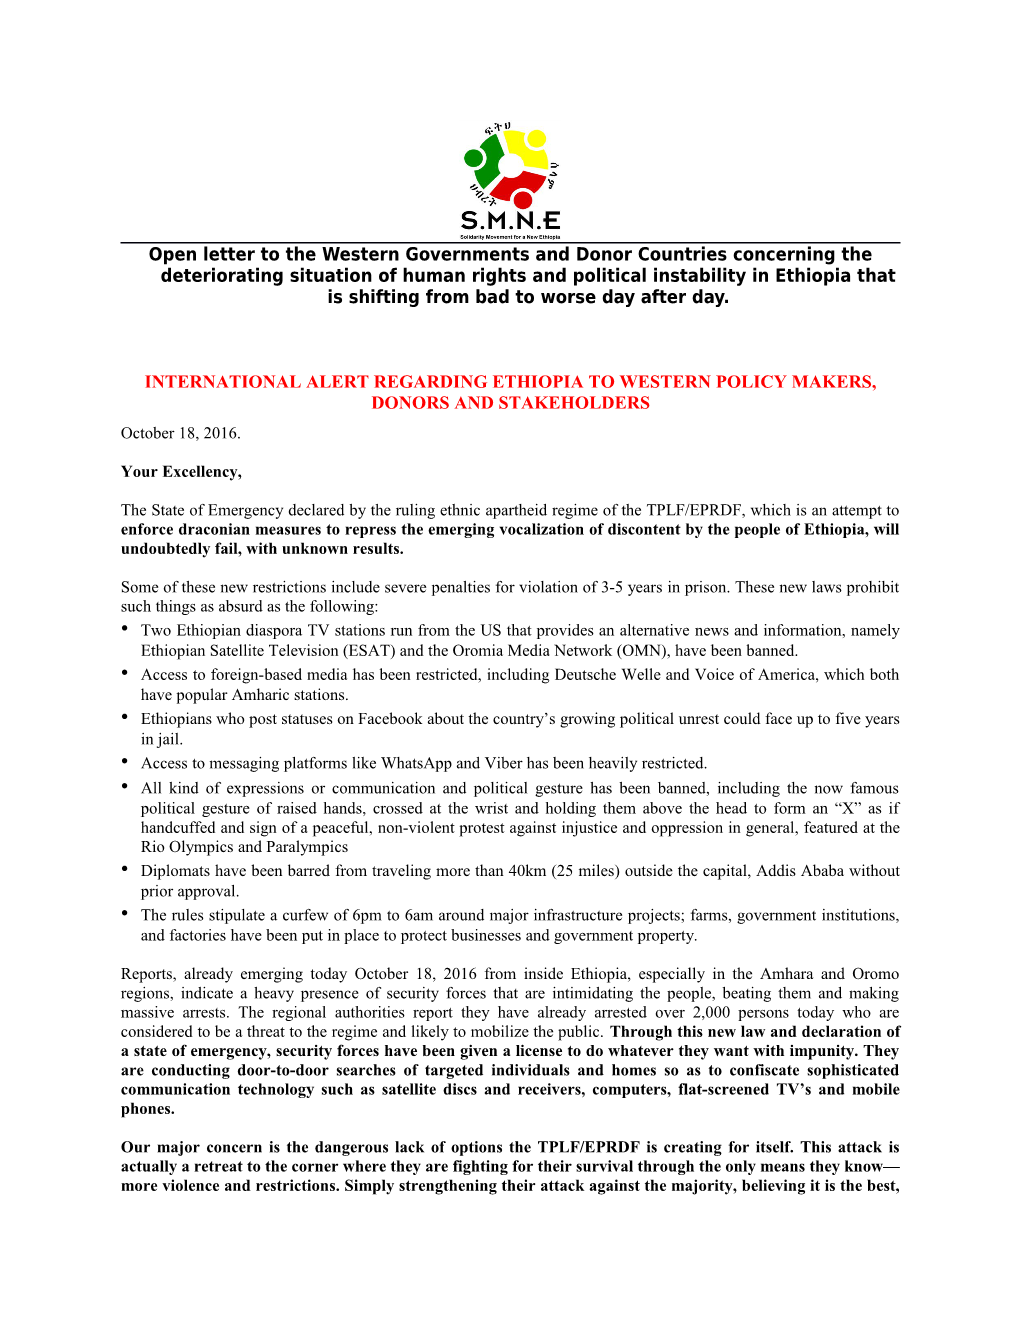 International Alert Regarding Ethiopia to Western Policy Makers, Donors and Stakeholders